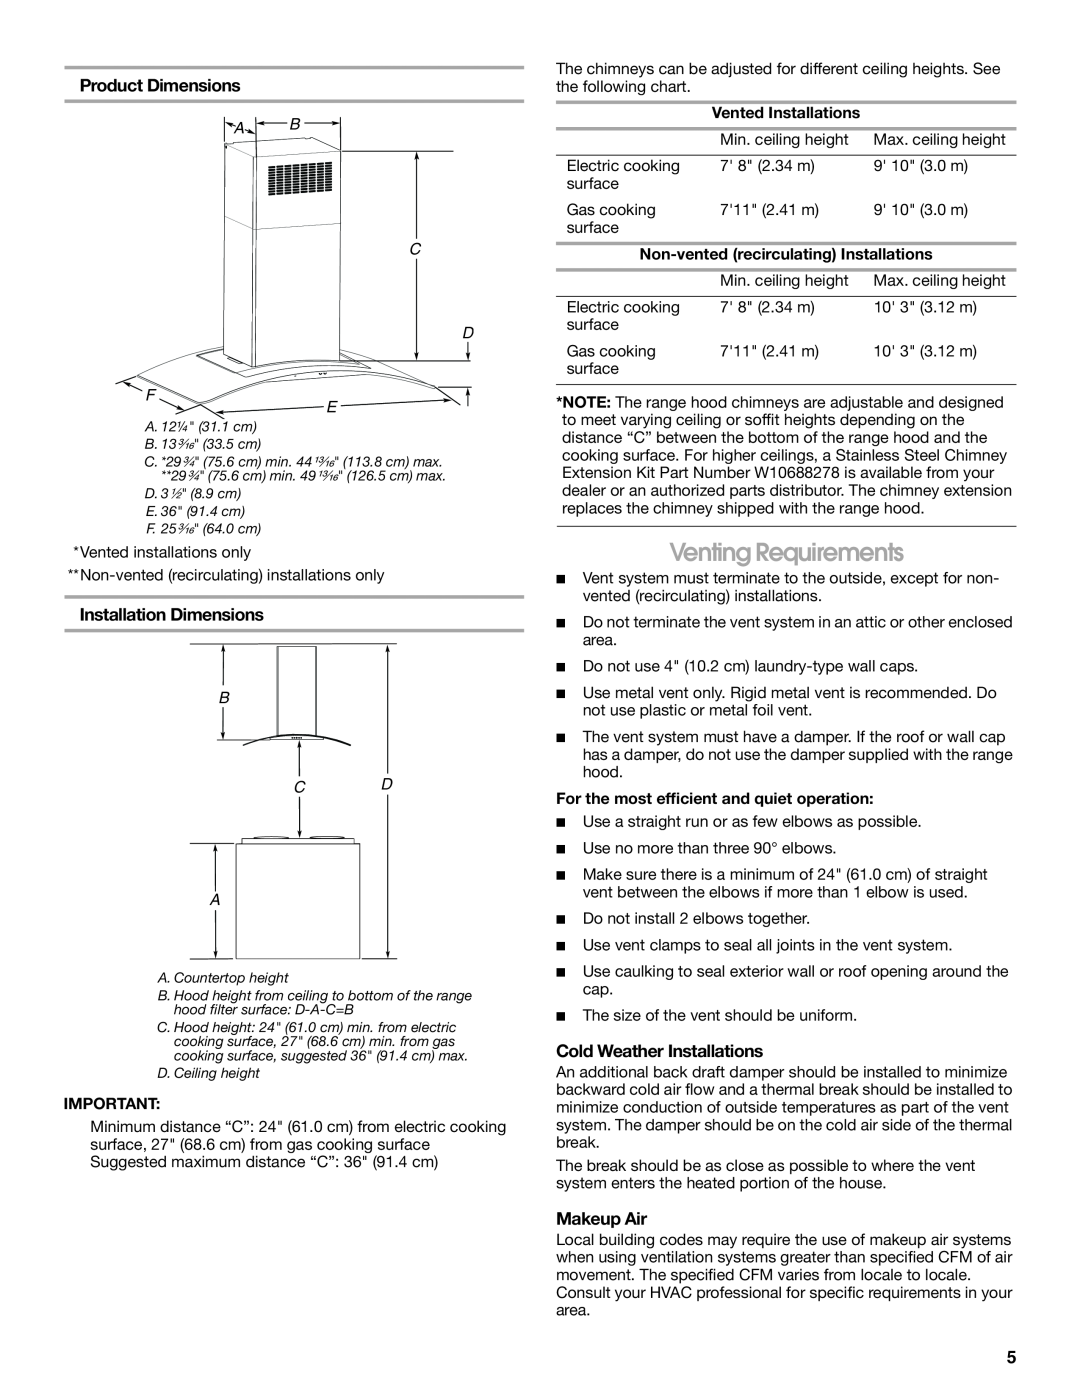 Whirlpool LI31HC/W10526058F Venting Requirements, Product Dimensions, Installation Dimensions, Cold Weather Installations 